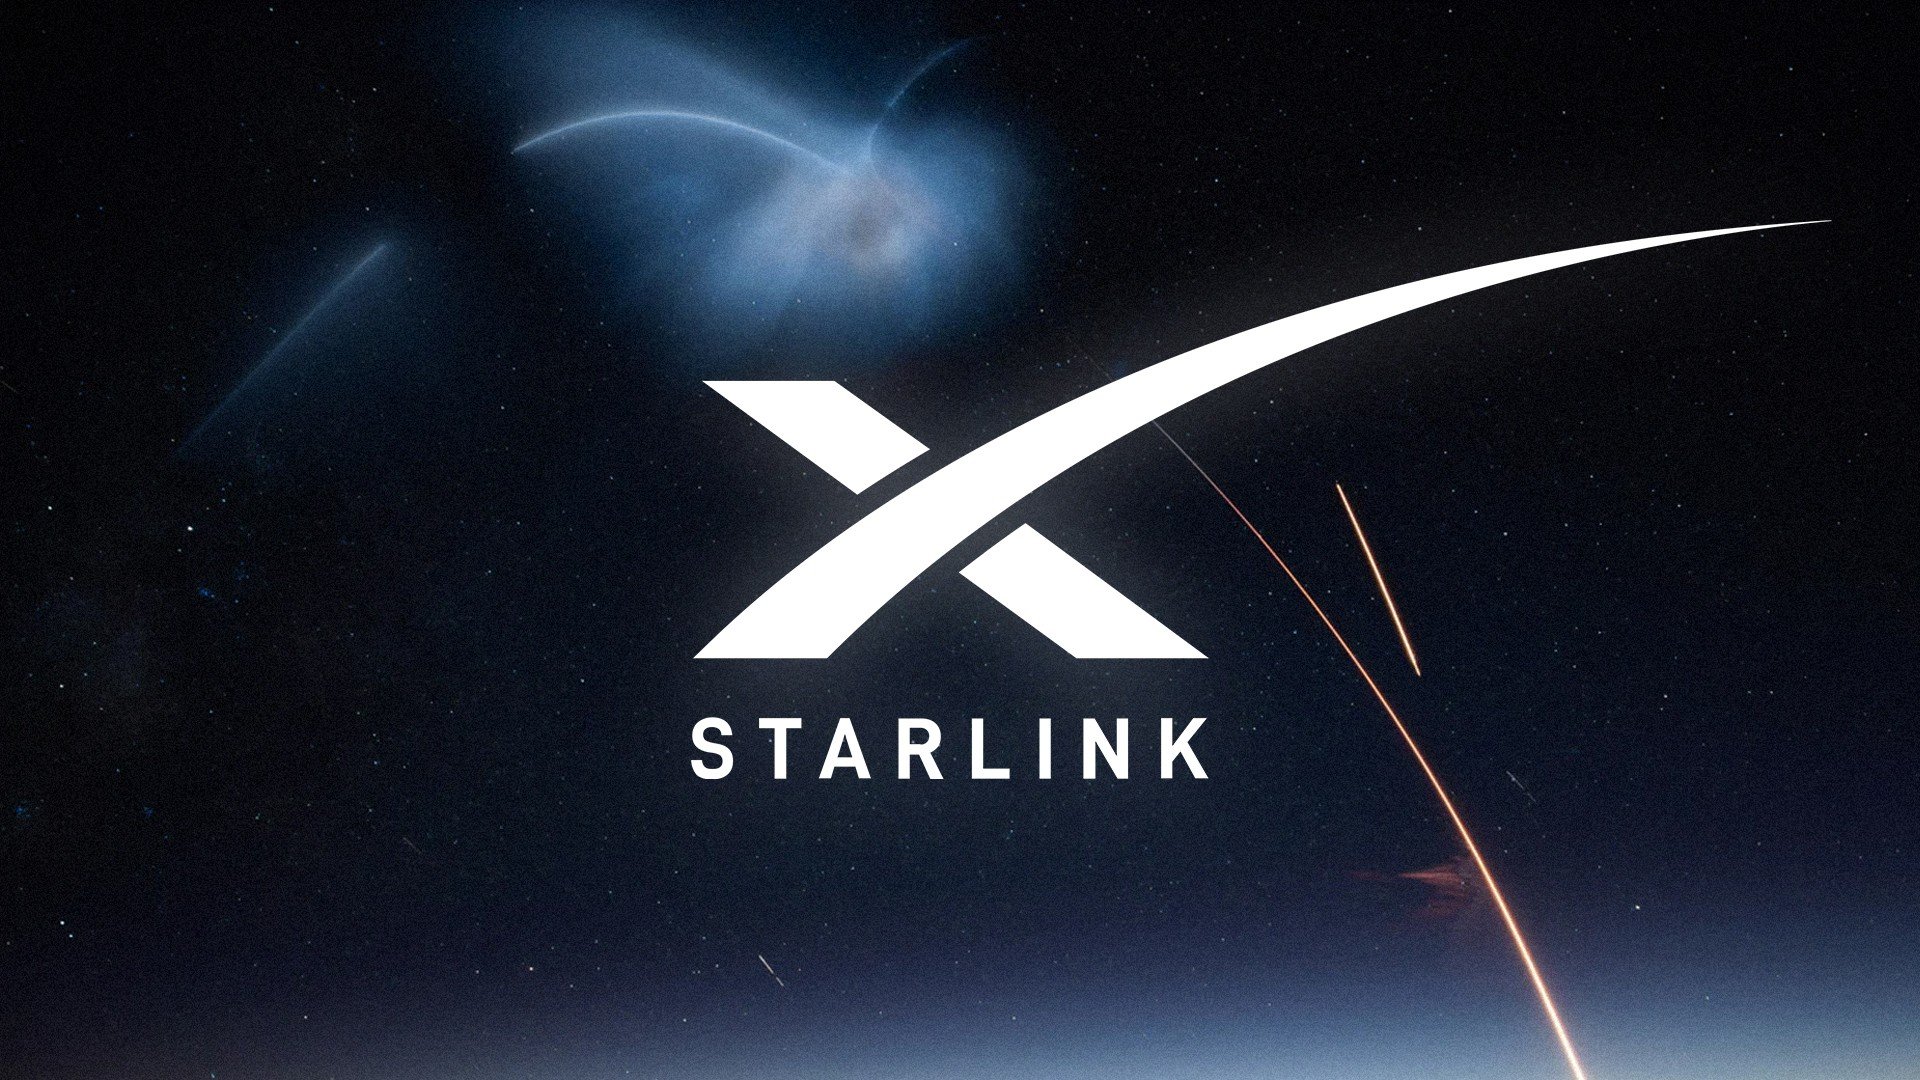 The service has been blocked for Starlink users after a satellite internet authentication error occurred